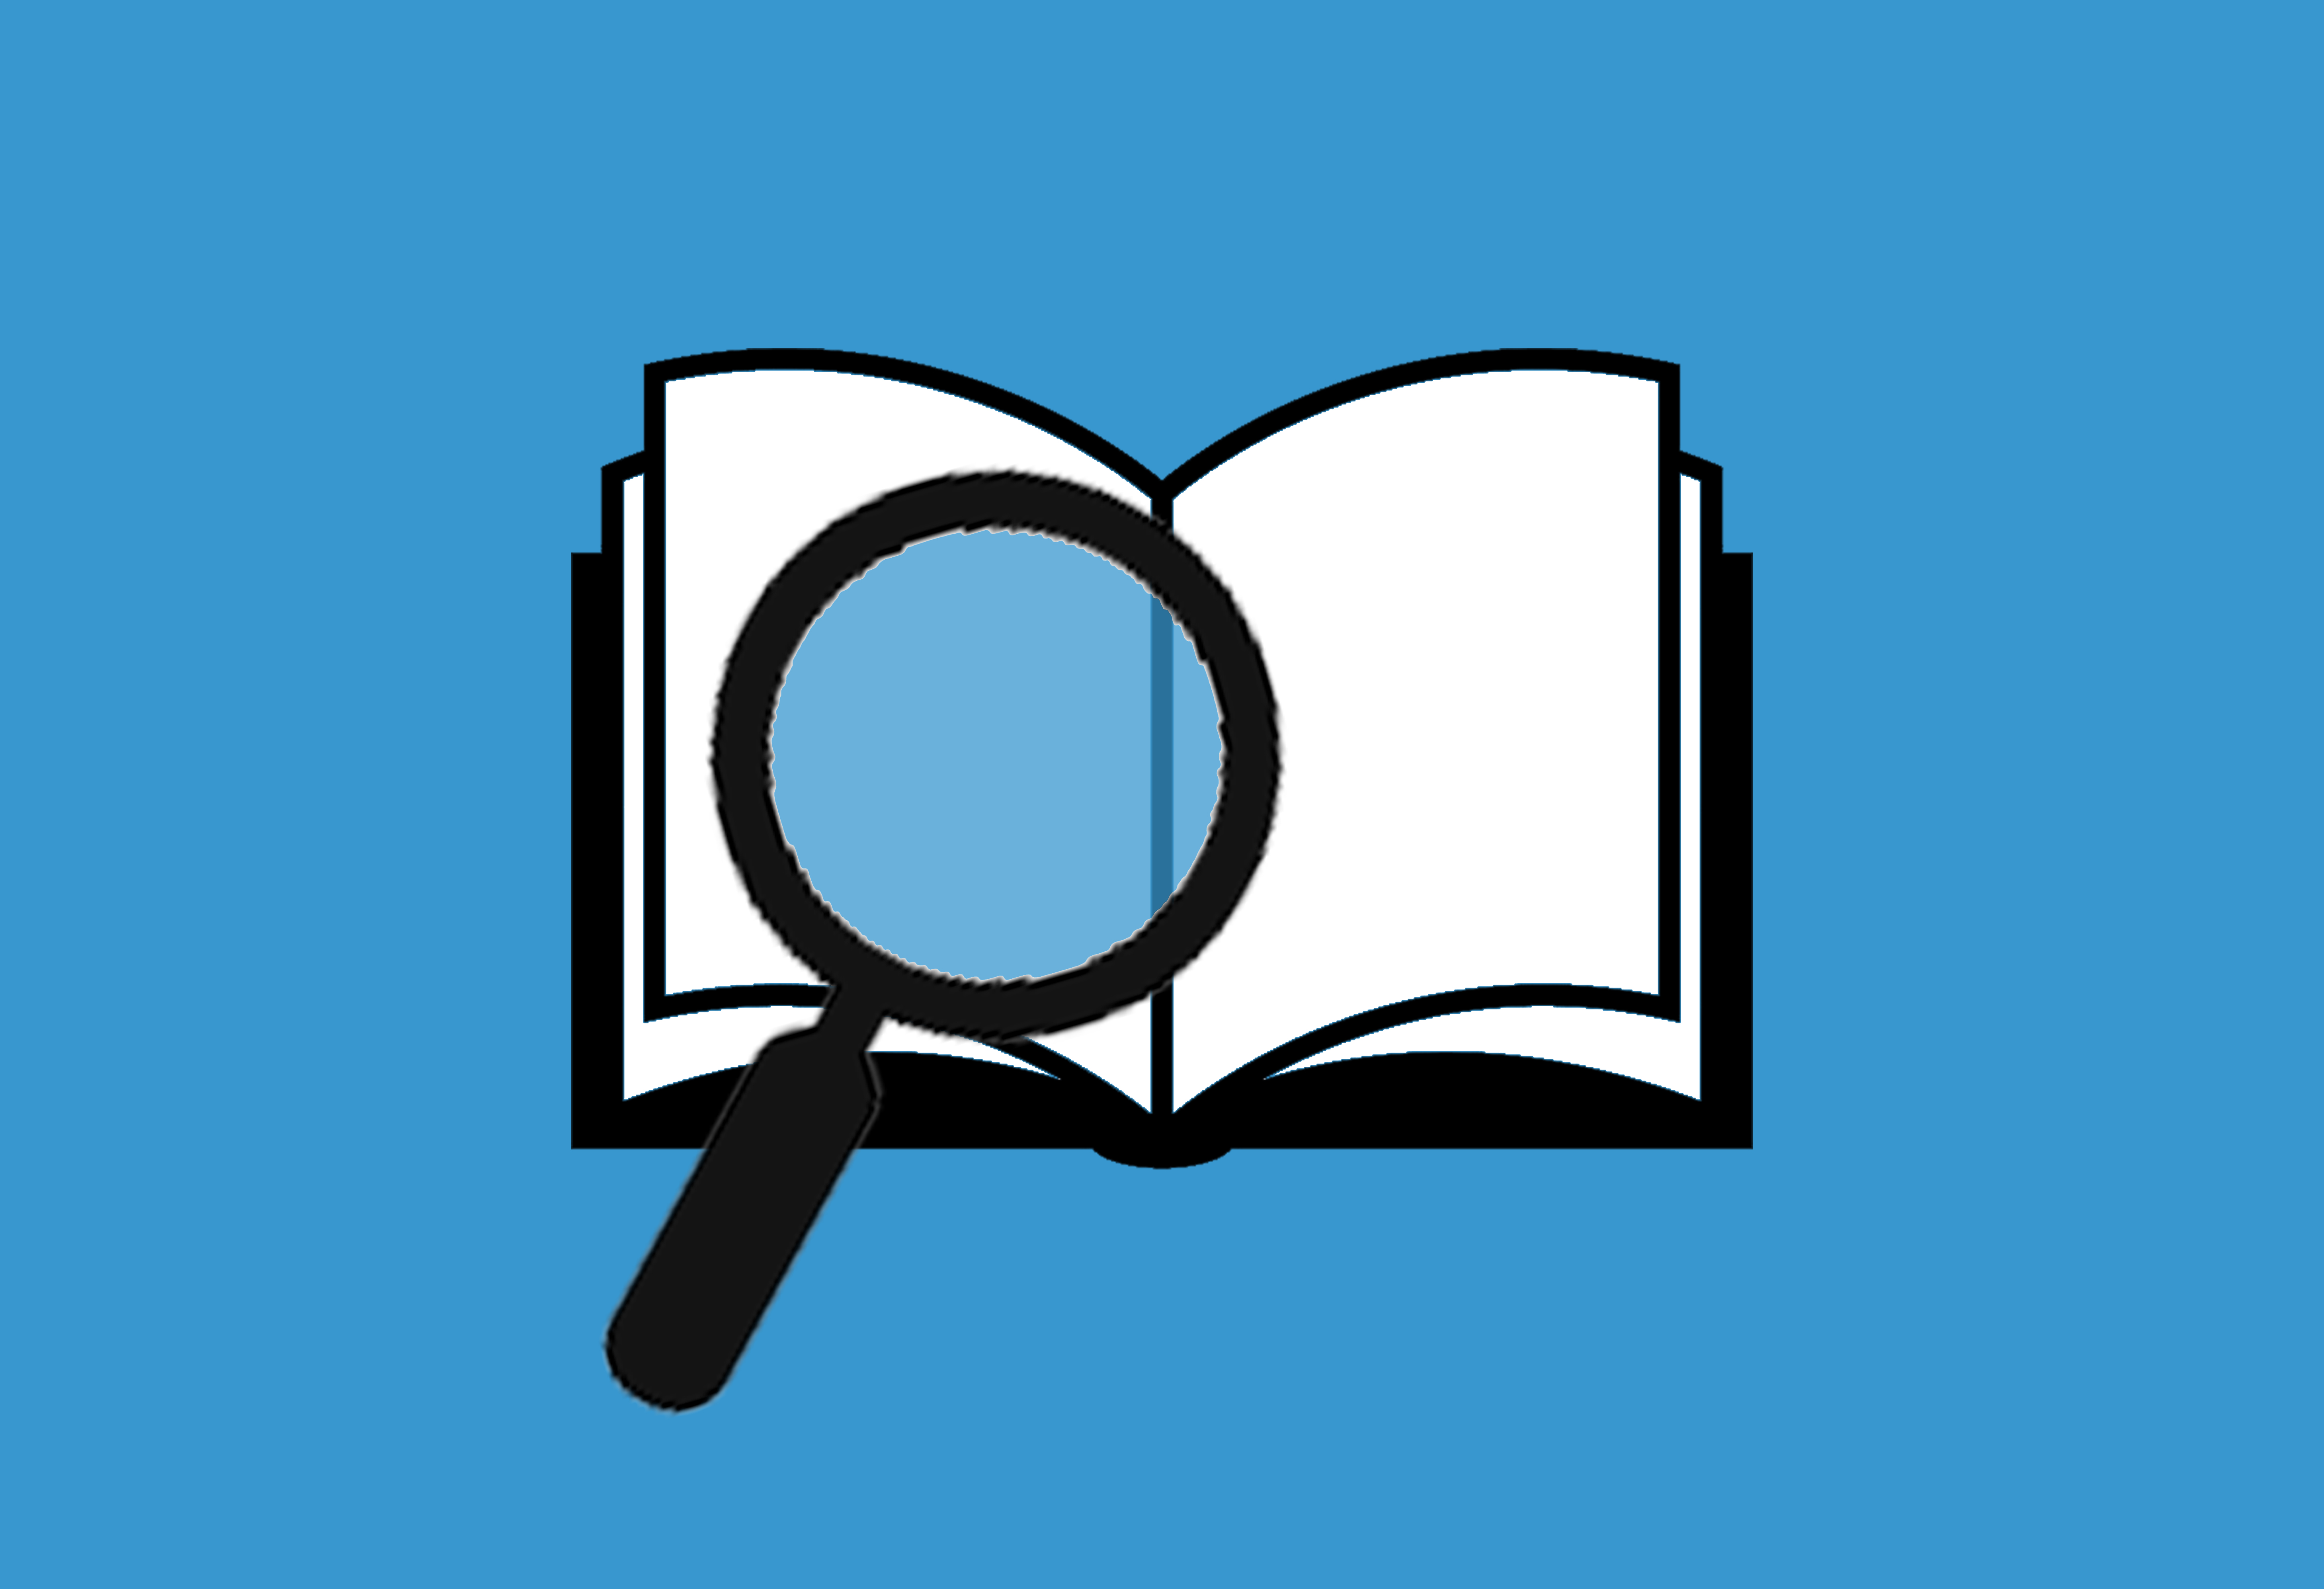 Graphic showing magnifying glass against an open book